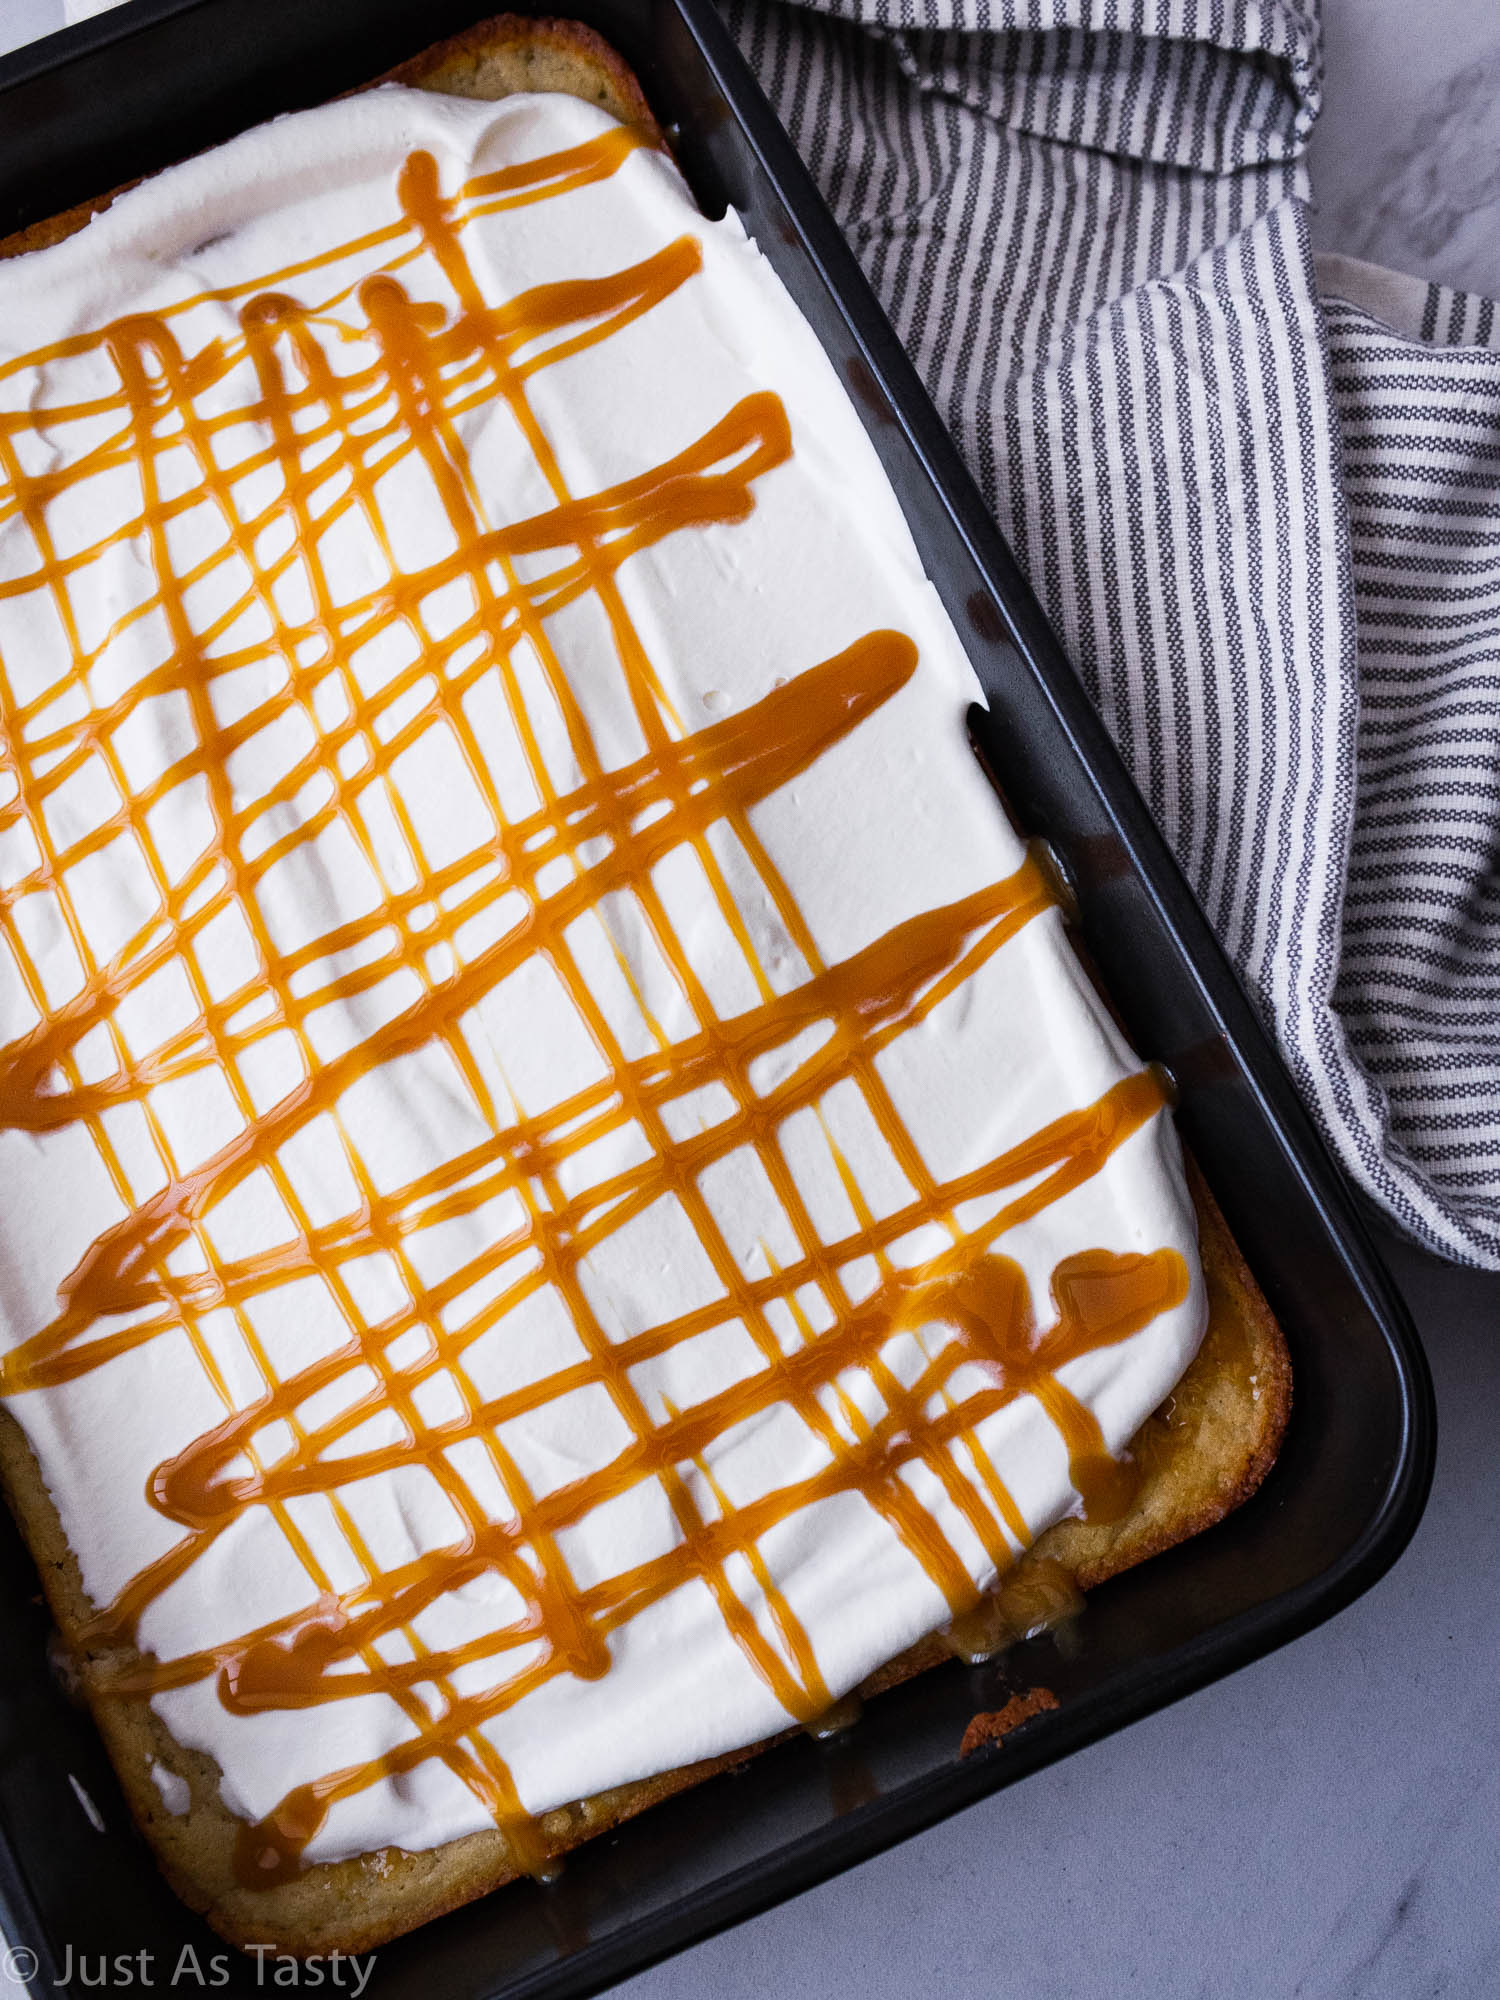 Caramel cake topped with whipped cream and a drizzle of caramel sauce in a cake pan.